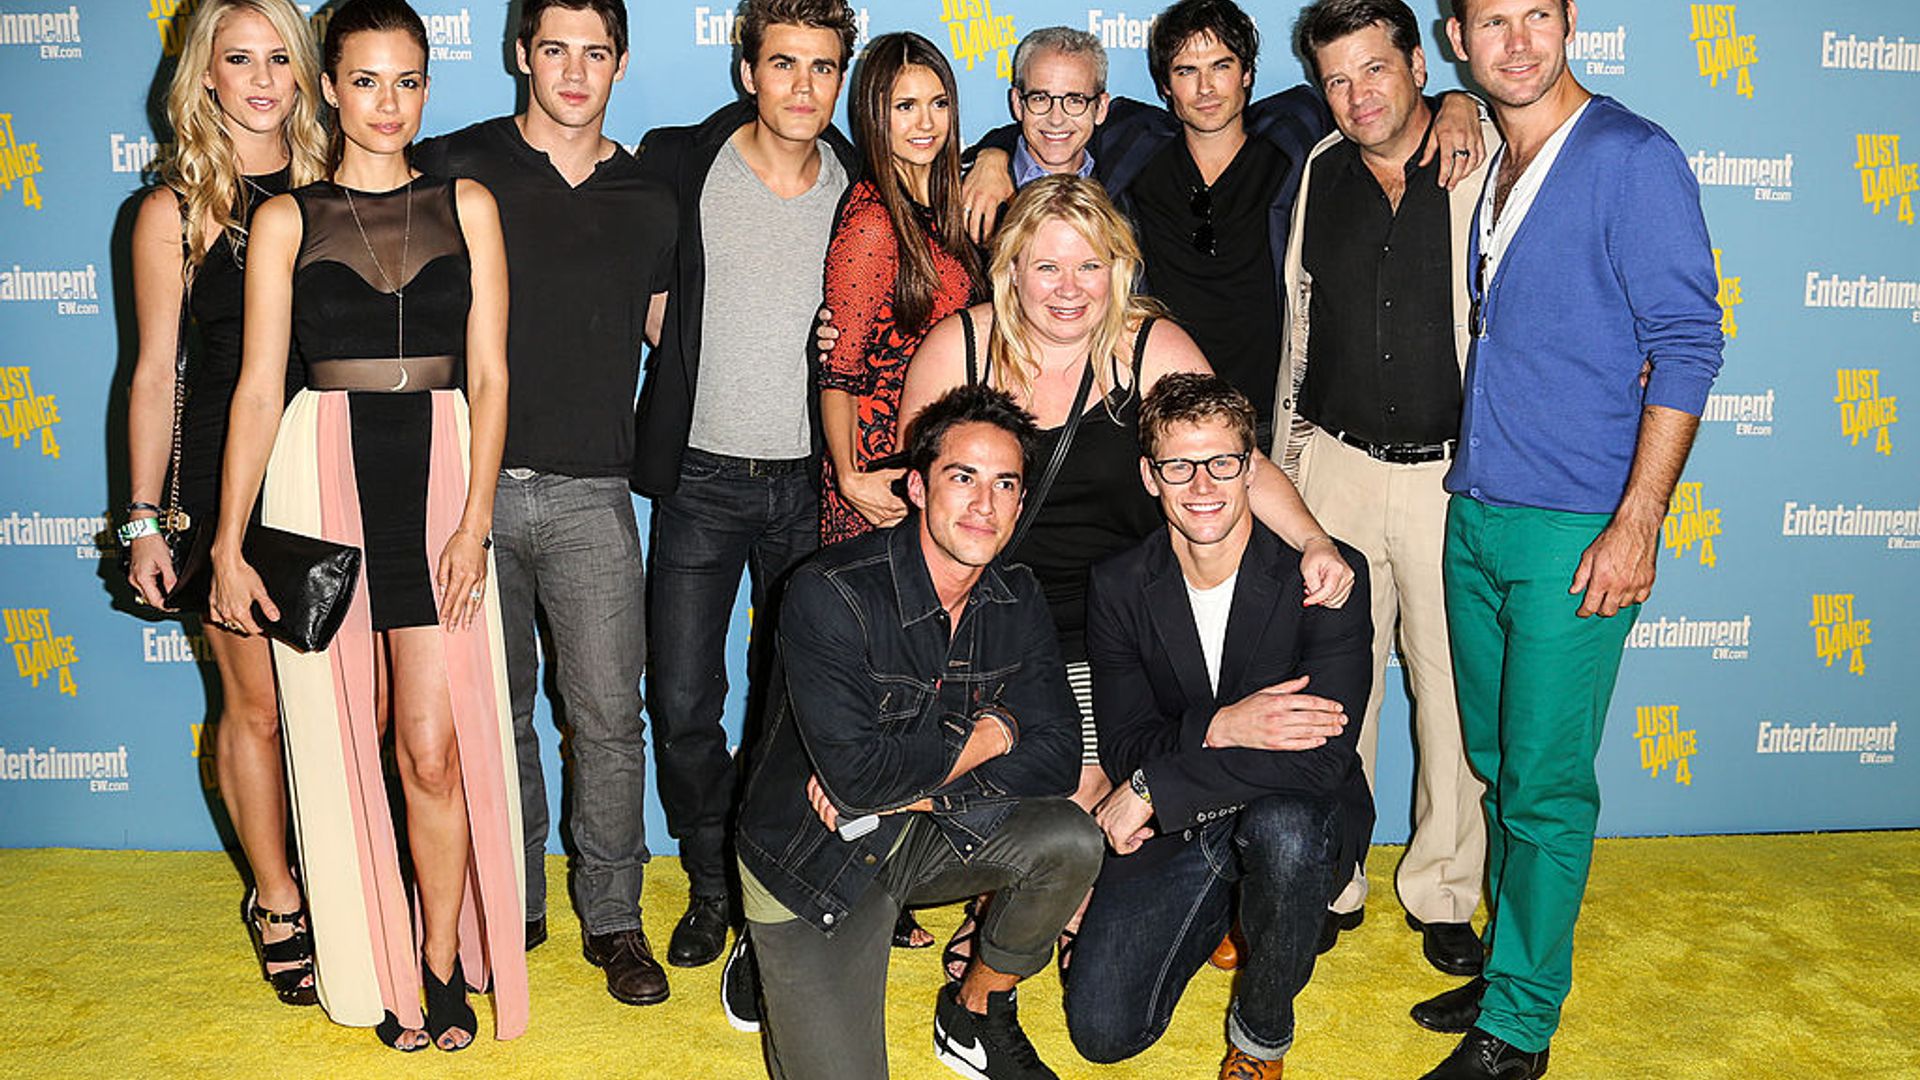 The Cast of the Vampire Diaries, including Torrey and Paul, arrives at Entertainment Weekly's Comic-Con celebration at Float at Hard Rock Hotel San Diego on July 14, 2012